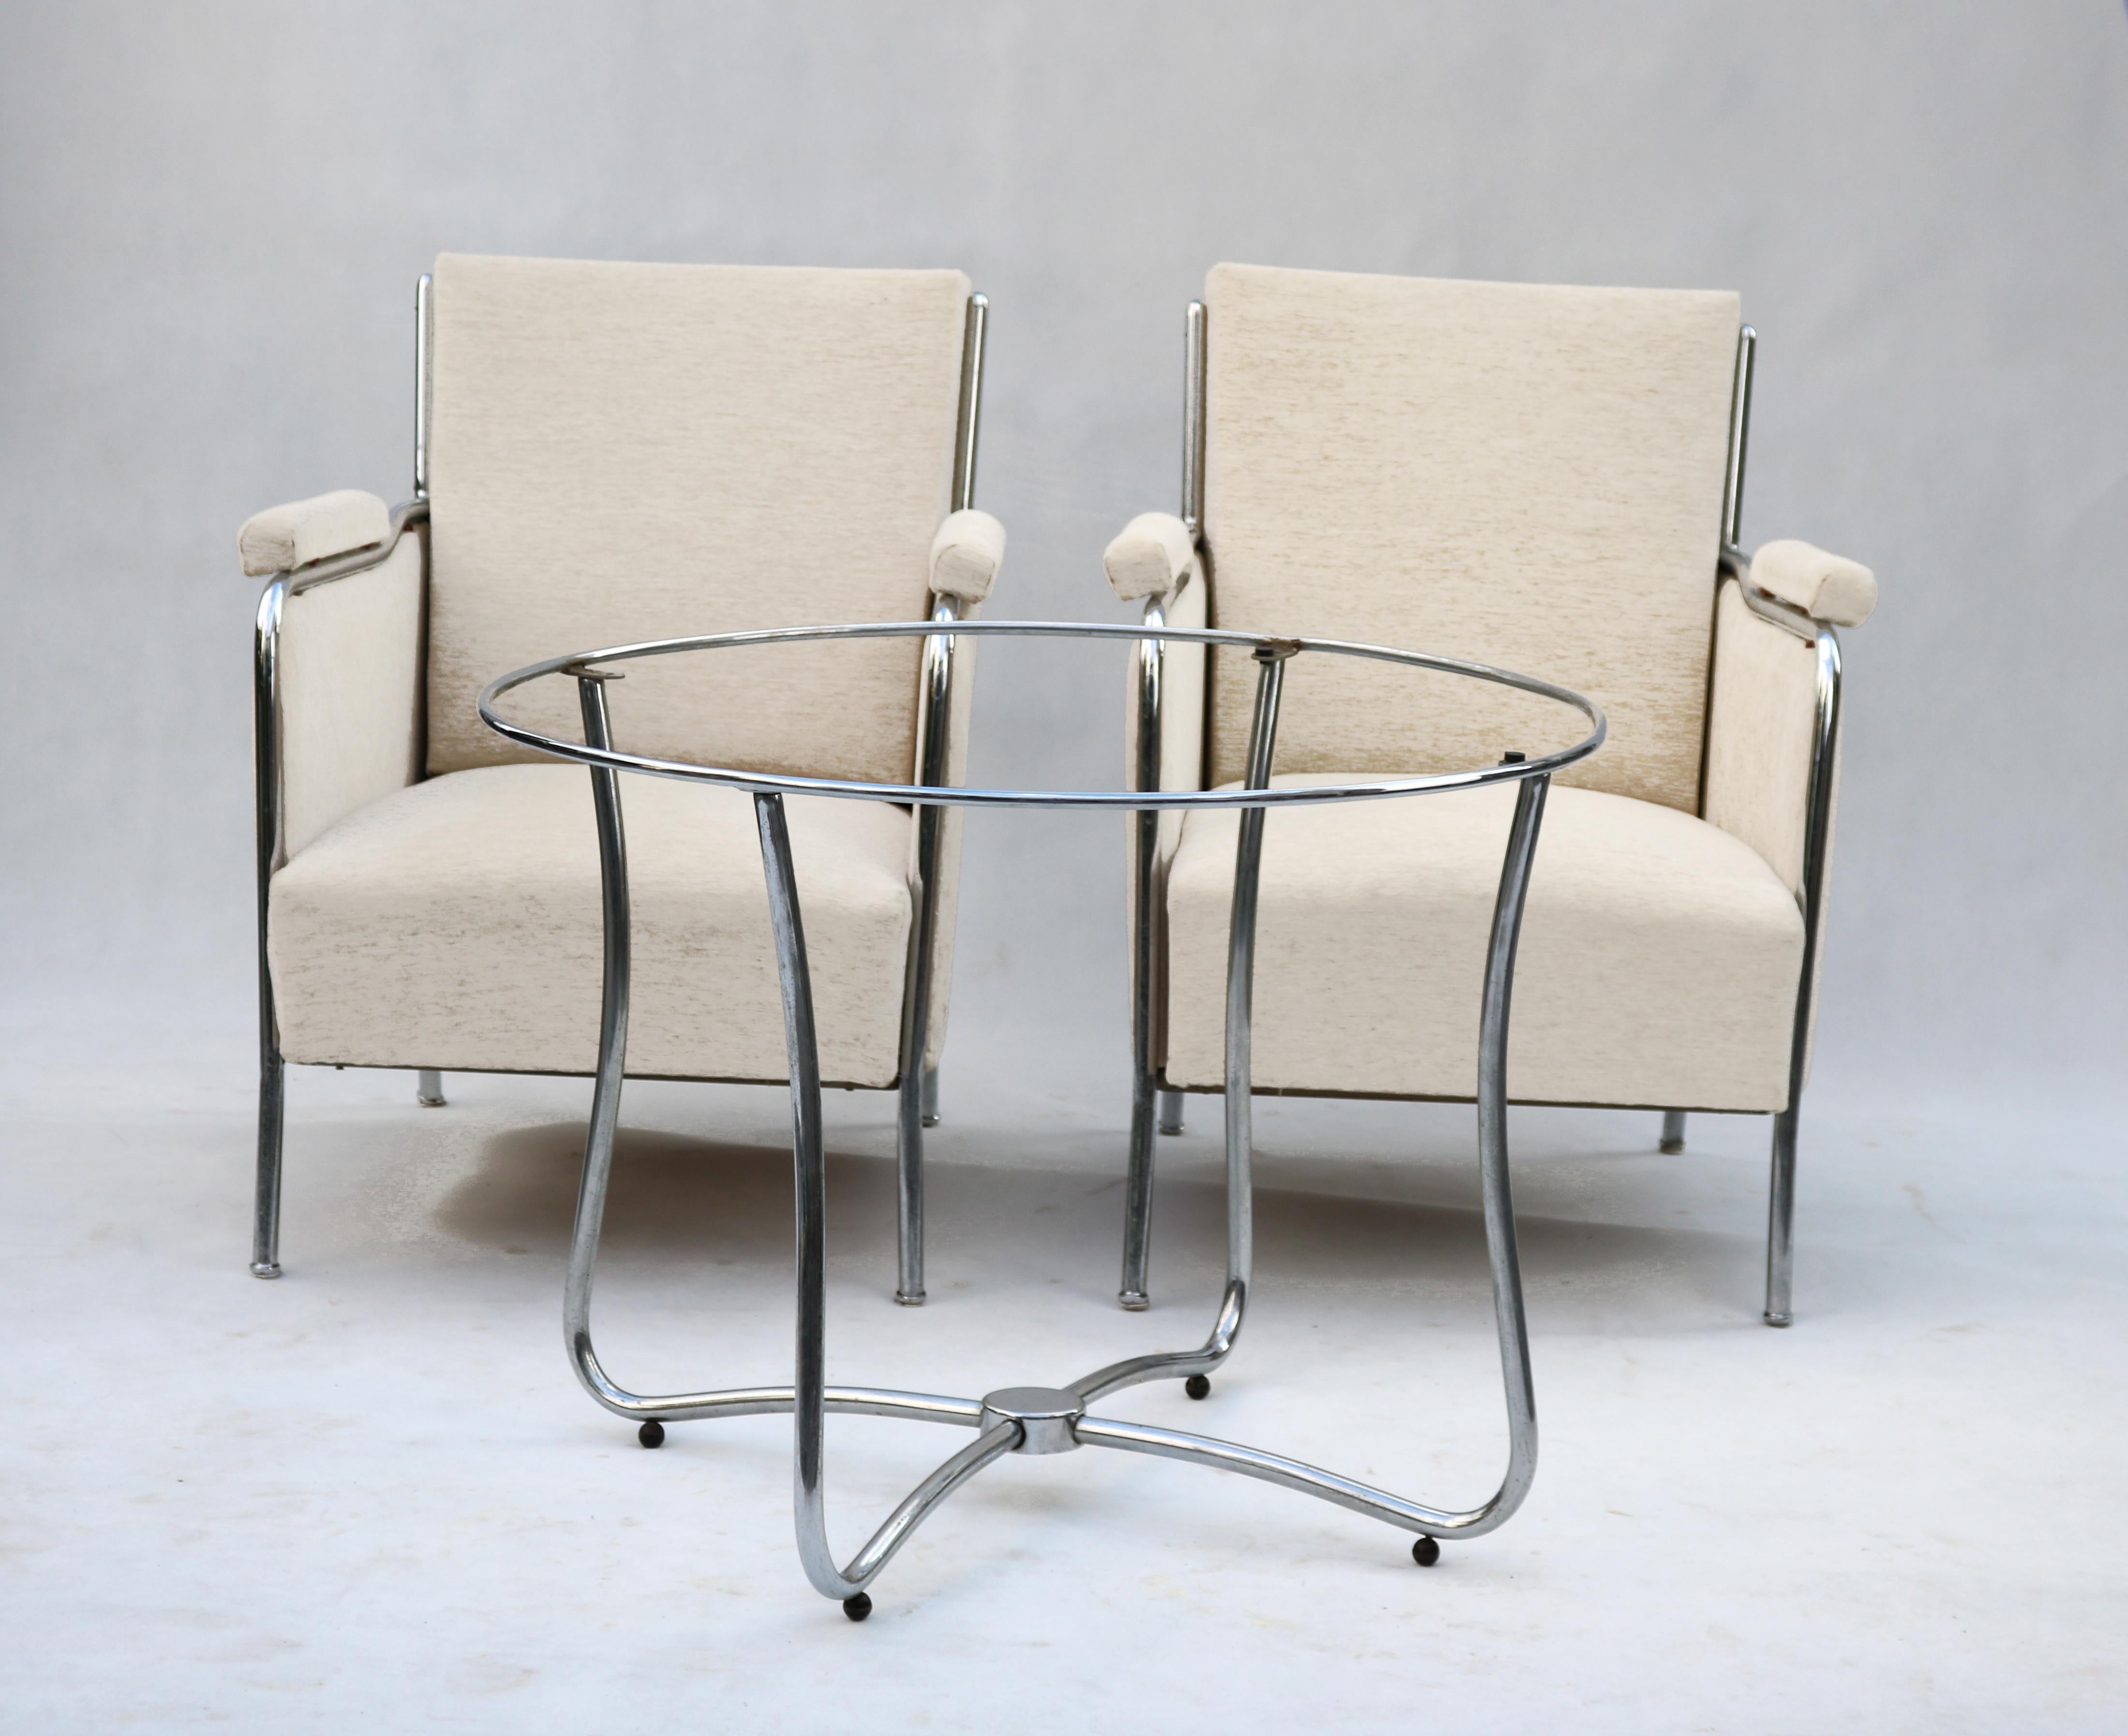 Upholstery Armchairs, Set of 2, Mid 20th Century, by Joszef Peresztegi For Sale